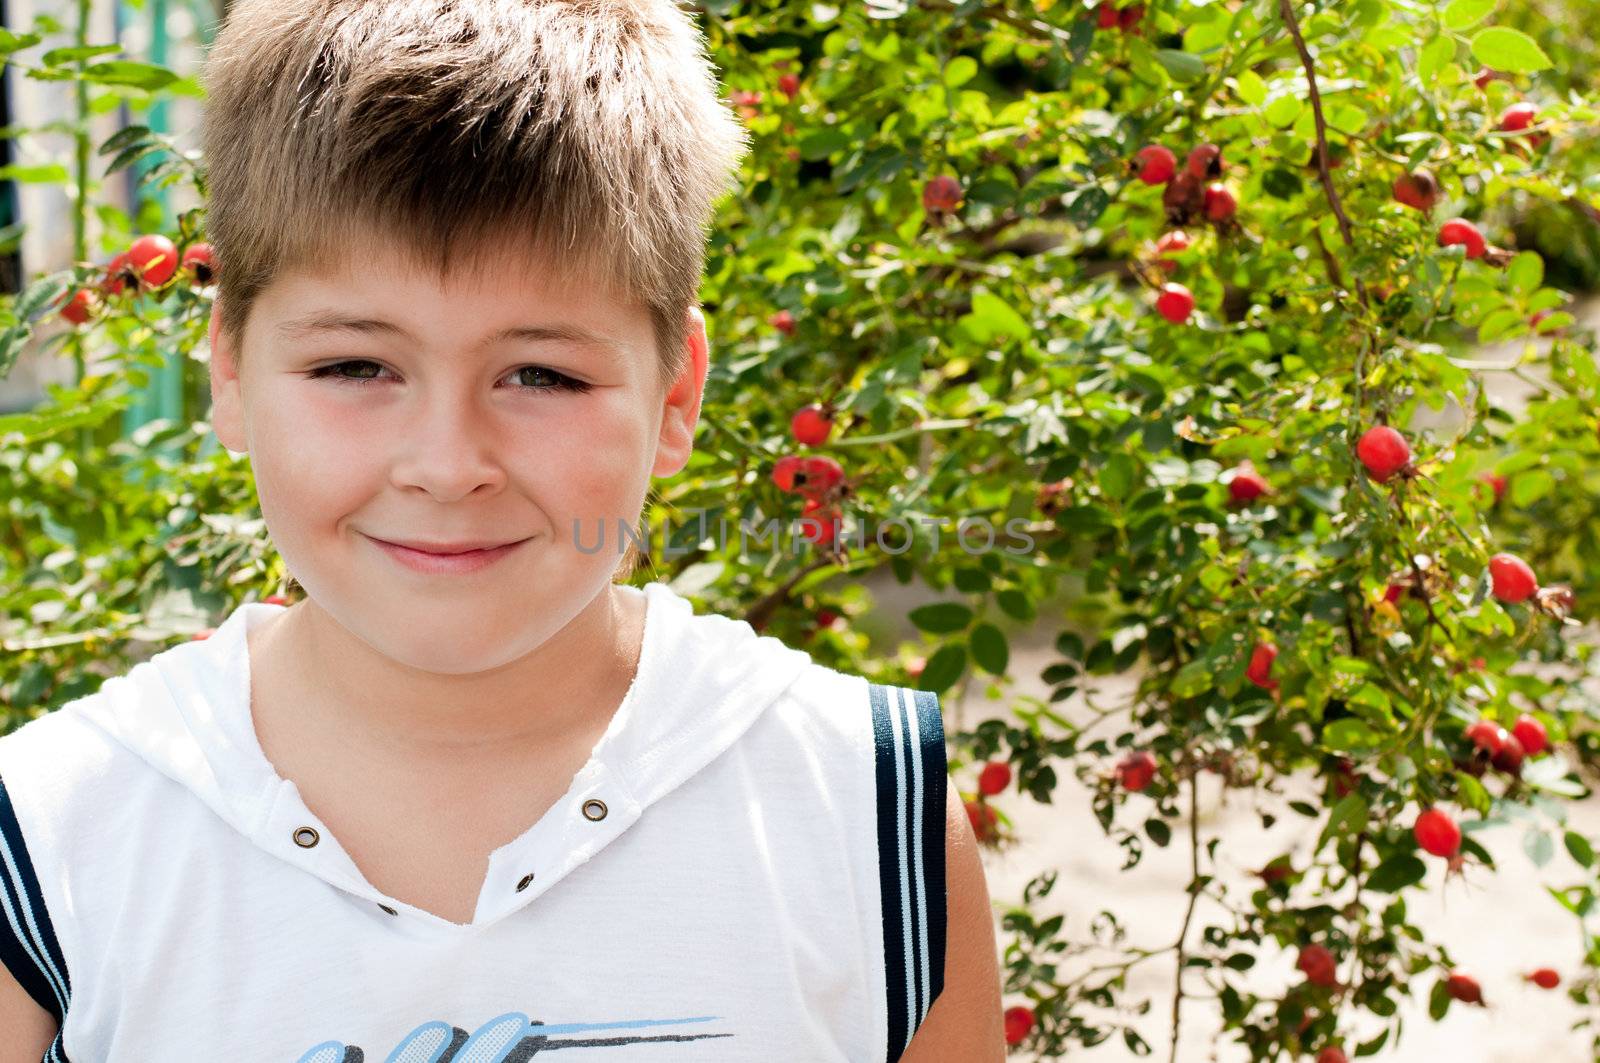 A boy of about rosehip with ripe fruits by olgavolodina